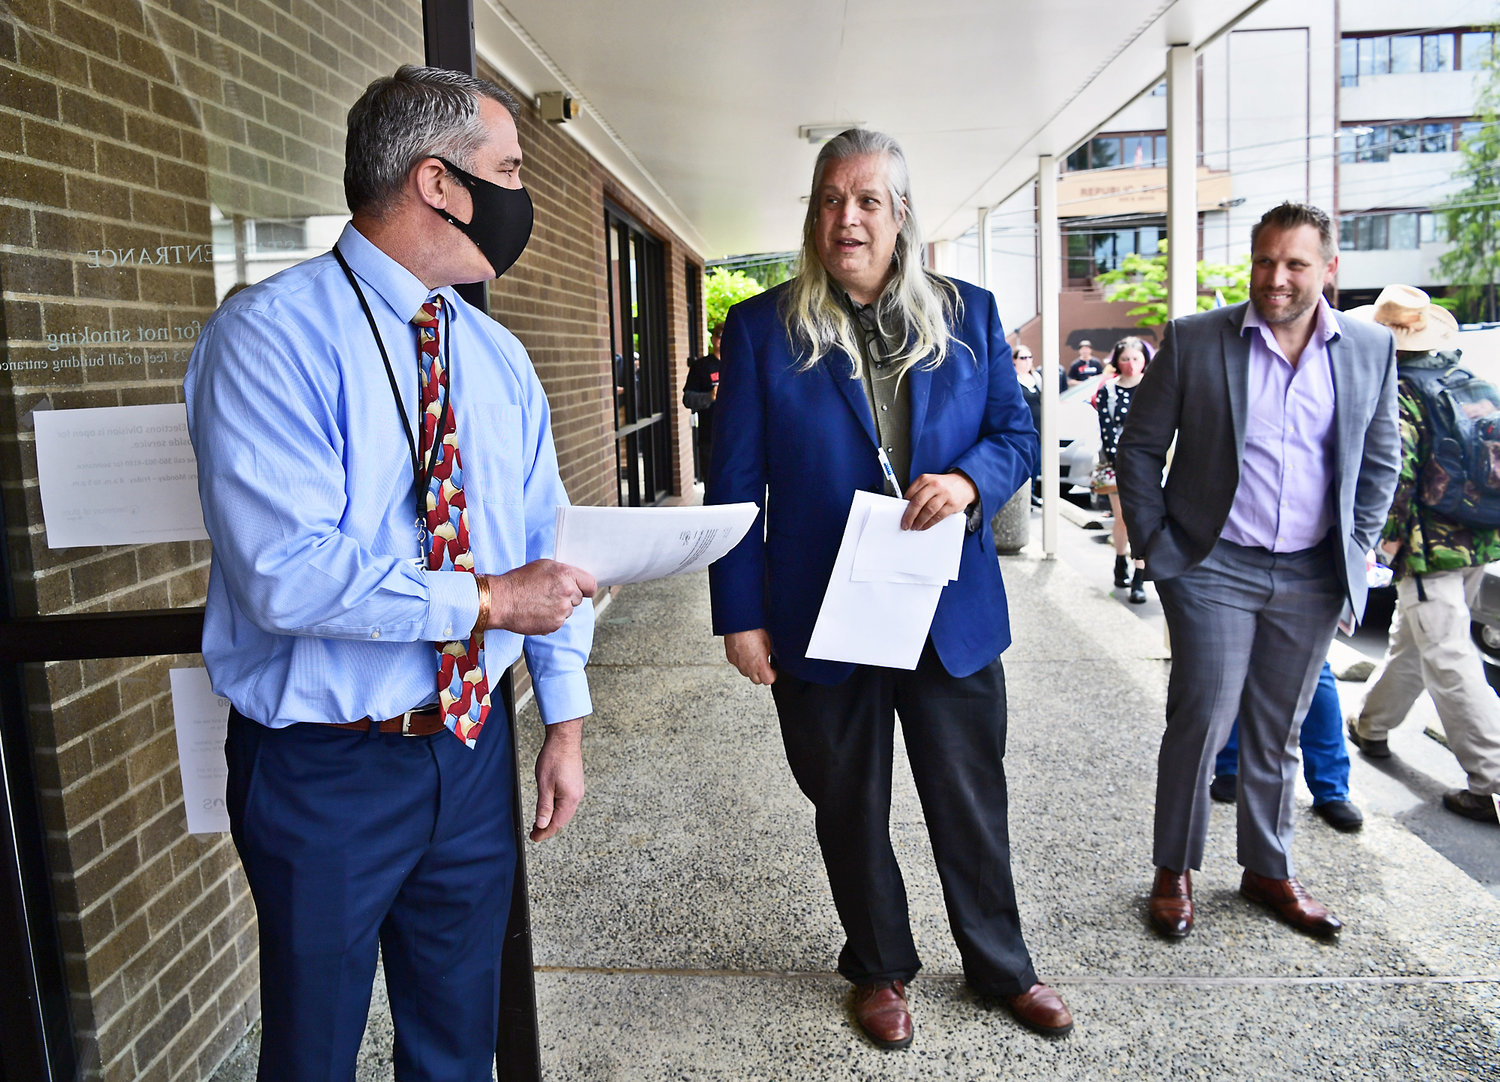 Olympia political activist C Davis, center, and Pasco attorney Pete Serrano, right, speak with Mark Neary, left, assistant secretary of state, in Olympia on Monday, May 17, at the Secretary of State’s Office after filing a petition for recall against Washington Gov. Jay Inslee on behalf of the organization Washingtonians to Recall Inslee.